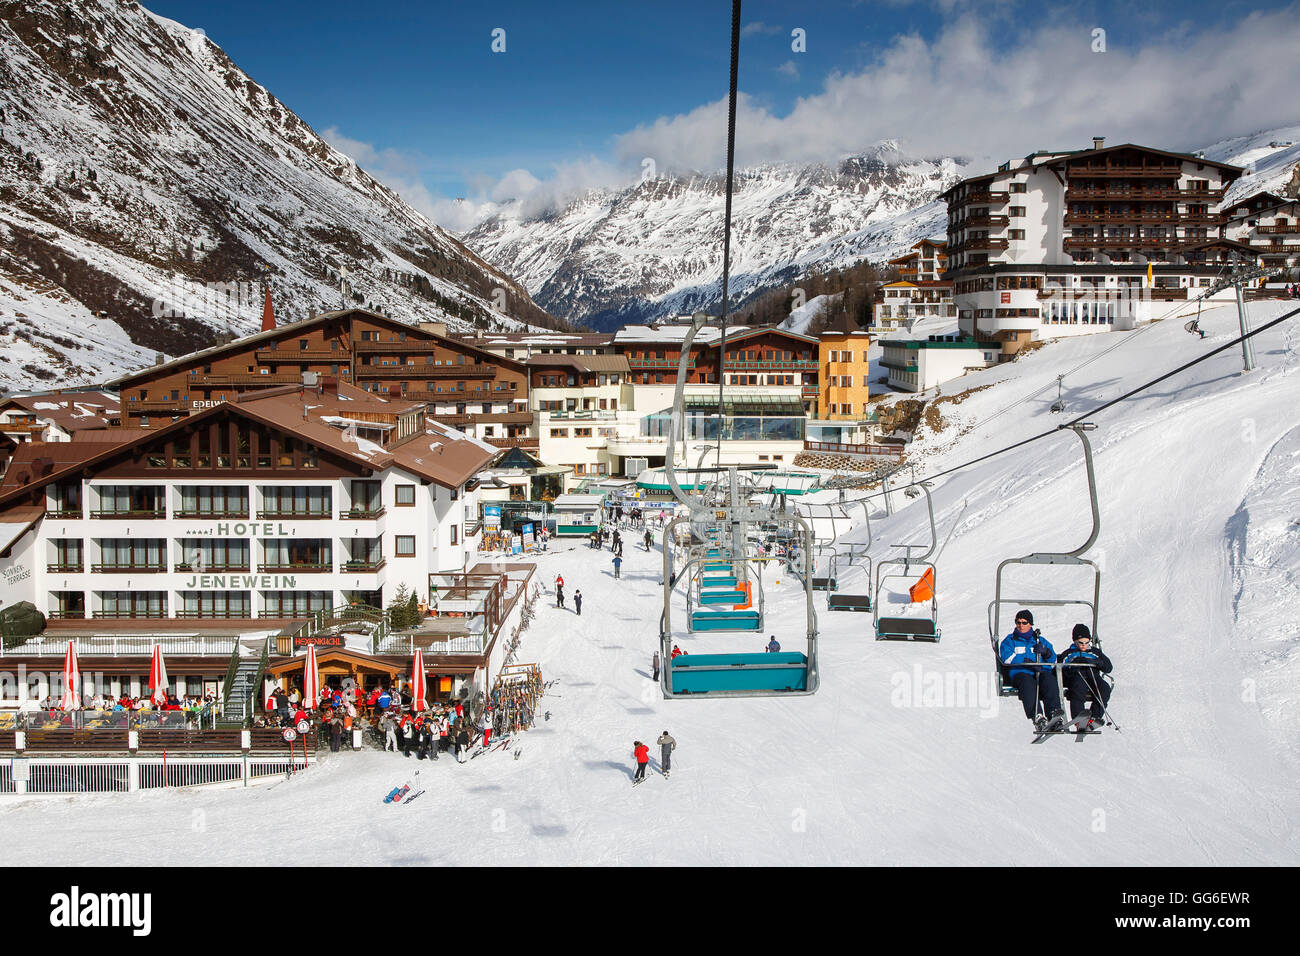 Alpine skiing village of Obergurgl, skiers relaxing while others head off on chairlifts, Otztal Alps, Tyrol, Austria Stock Photo